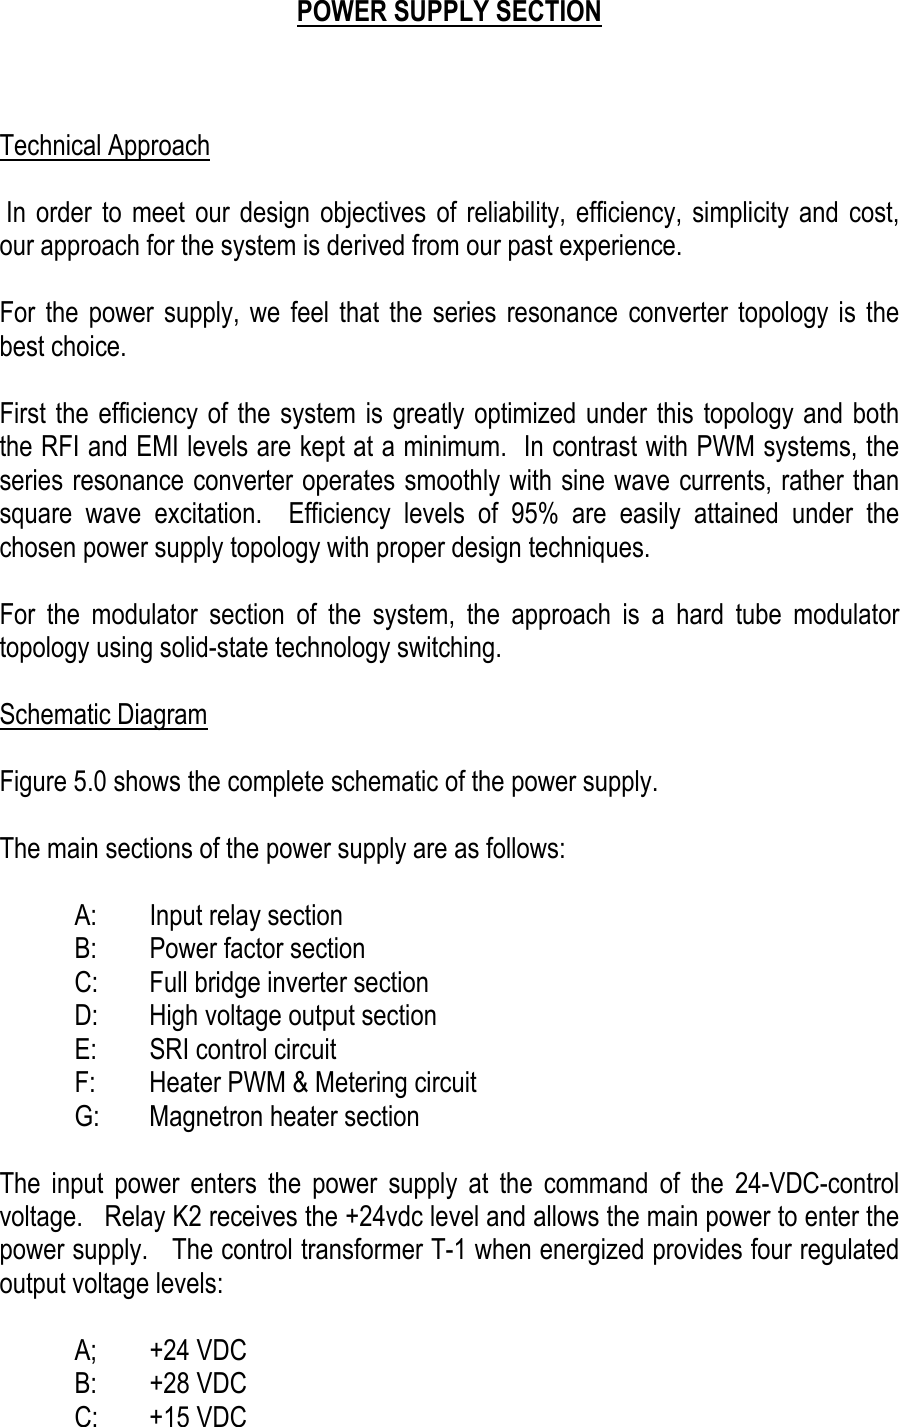     POWER SUPPLY SECTION    Technical Approach   In order to meet our design objectives of reliability, efficiency, simplicity and cost, our approach for the system is derived from our past experience.  For the power supply, we feel that the series resonance converter topology is the best choice.   First the efficiency of the system is greatly optimized under this topology and both the RFI and EMI levels are kept at a minimum.  In contrast with PWM systems, the series resonance converter operates smoothly with sine wave currents, rather than   square wave excitation.  Efficiency levels of 95% are easily attained under the chosen power supply topology with proper design techniques.  For the modulator section of the system, the approach is a hard tube modulator topology using solid-state technology switching.    Schematic Diagram  Figure 5.0 shows the complete schematic of the power supply.   The main sections of the power supply are as follows:    A:  Input relay section   B:  Power factor section   C:  Full bridge inverter section   D:  High voltage output section   E:  SRI control circuit   F:  Heater PWM &amp; Metering circuit   G:  Magnetron heater section  The input power enters the power supply at the command of the 24-VDC-control voltage.   Relay K2 receives the +24vdc level and allows the main power to enter the power supply.   The control transformer T-1 when energized provides four regulated output voltage levels:   A; +24 VDC  B: +28 VDC  C: +15 VDC 